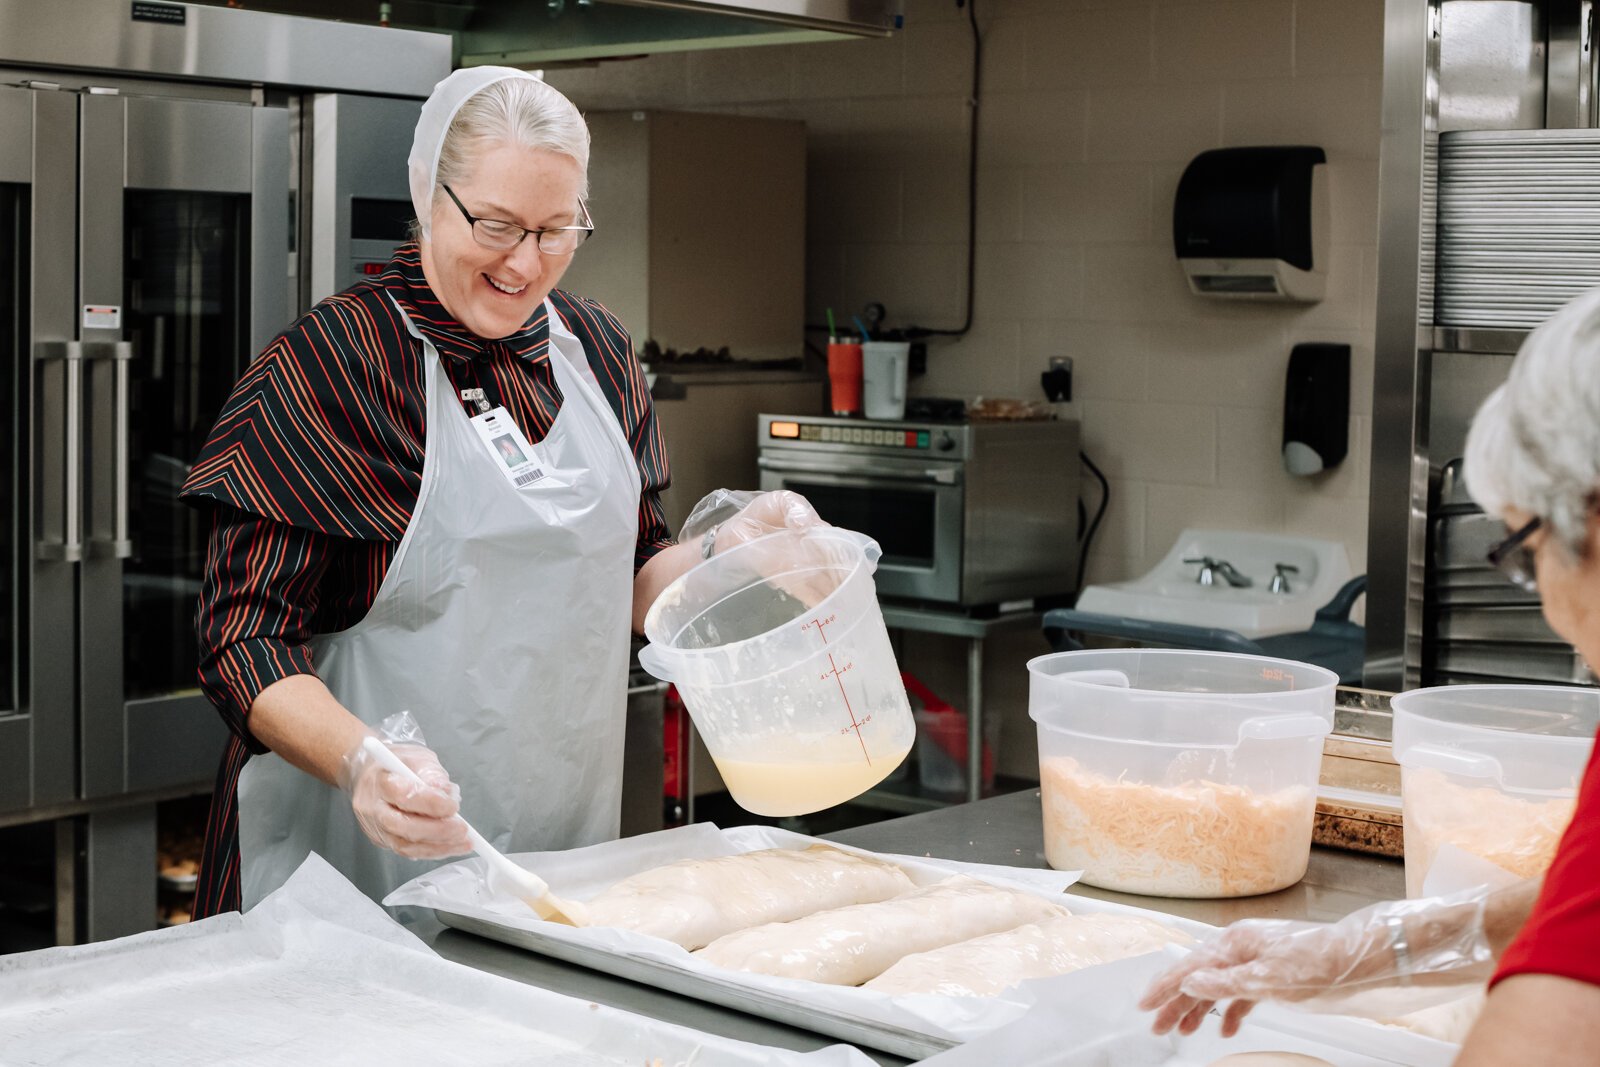 Landes's staff Judith Brovont, left, and Peggy Selleck prepare sausage bread for lunch at Manchester Junior-Senior High School, which features local pork.